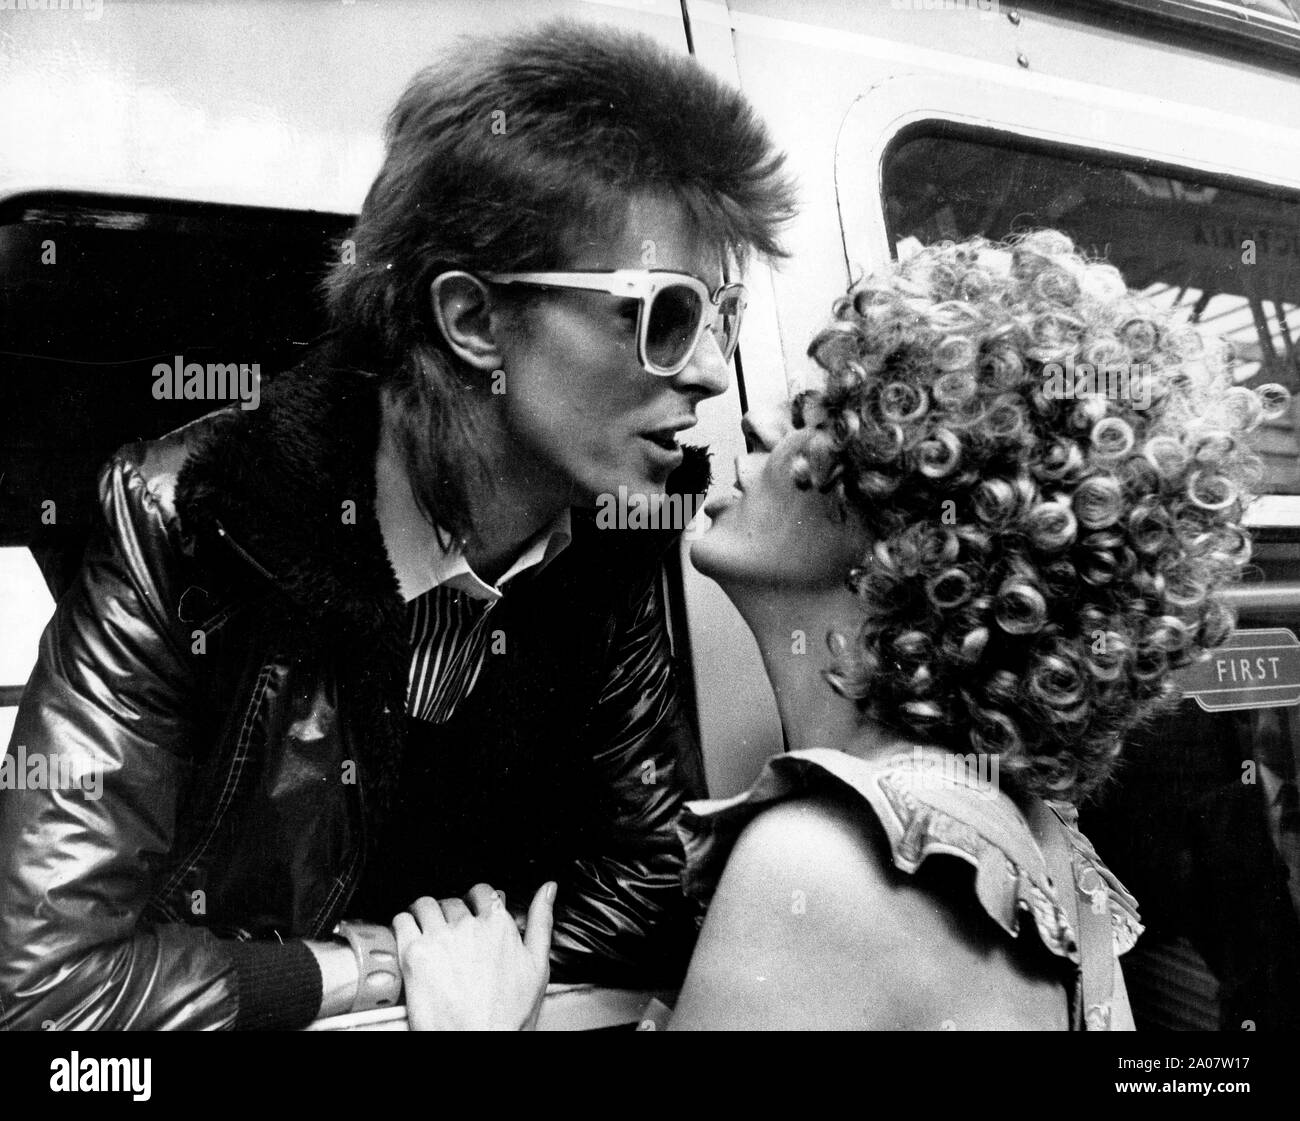 July 9, 1973 - London, England, United Kingdom - Pop Star DAVID BOWIE (26), kisses his wife ANGIE from inside his train at Victoria Station. He is off to Paris to start recording his latest LP. (Credit Image: © Keystone Press Agency/Keystone USA via ZUMAPRESS.com) Stock Photo